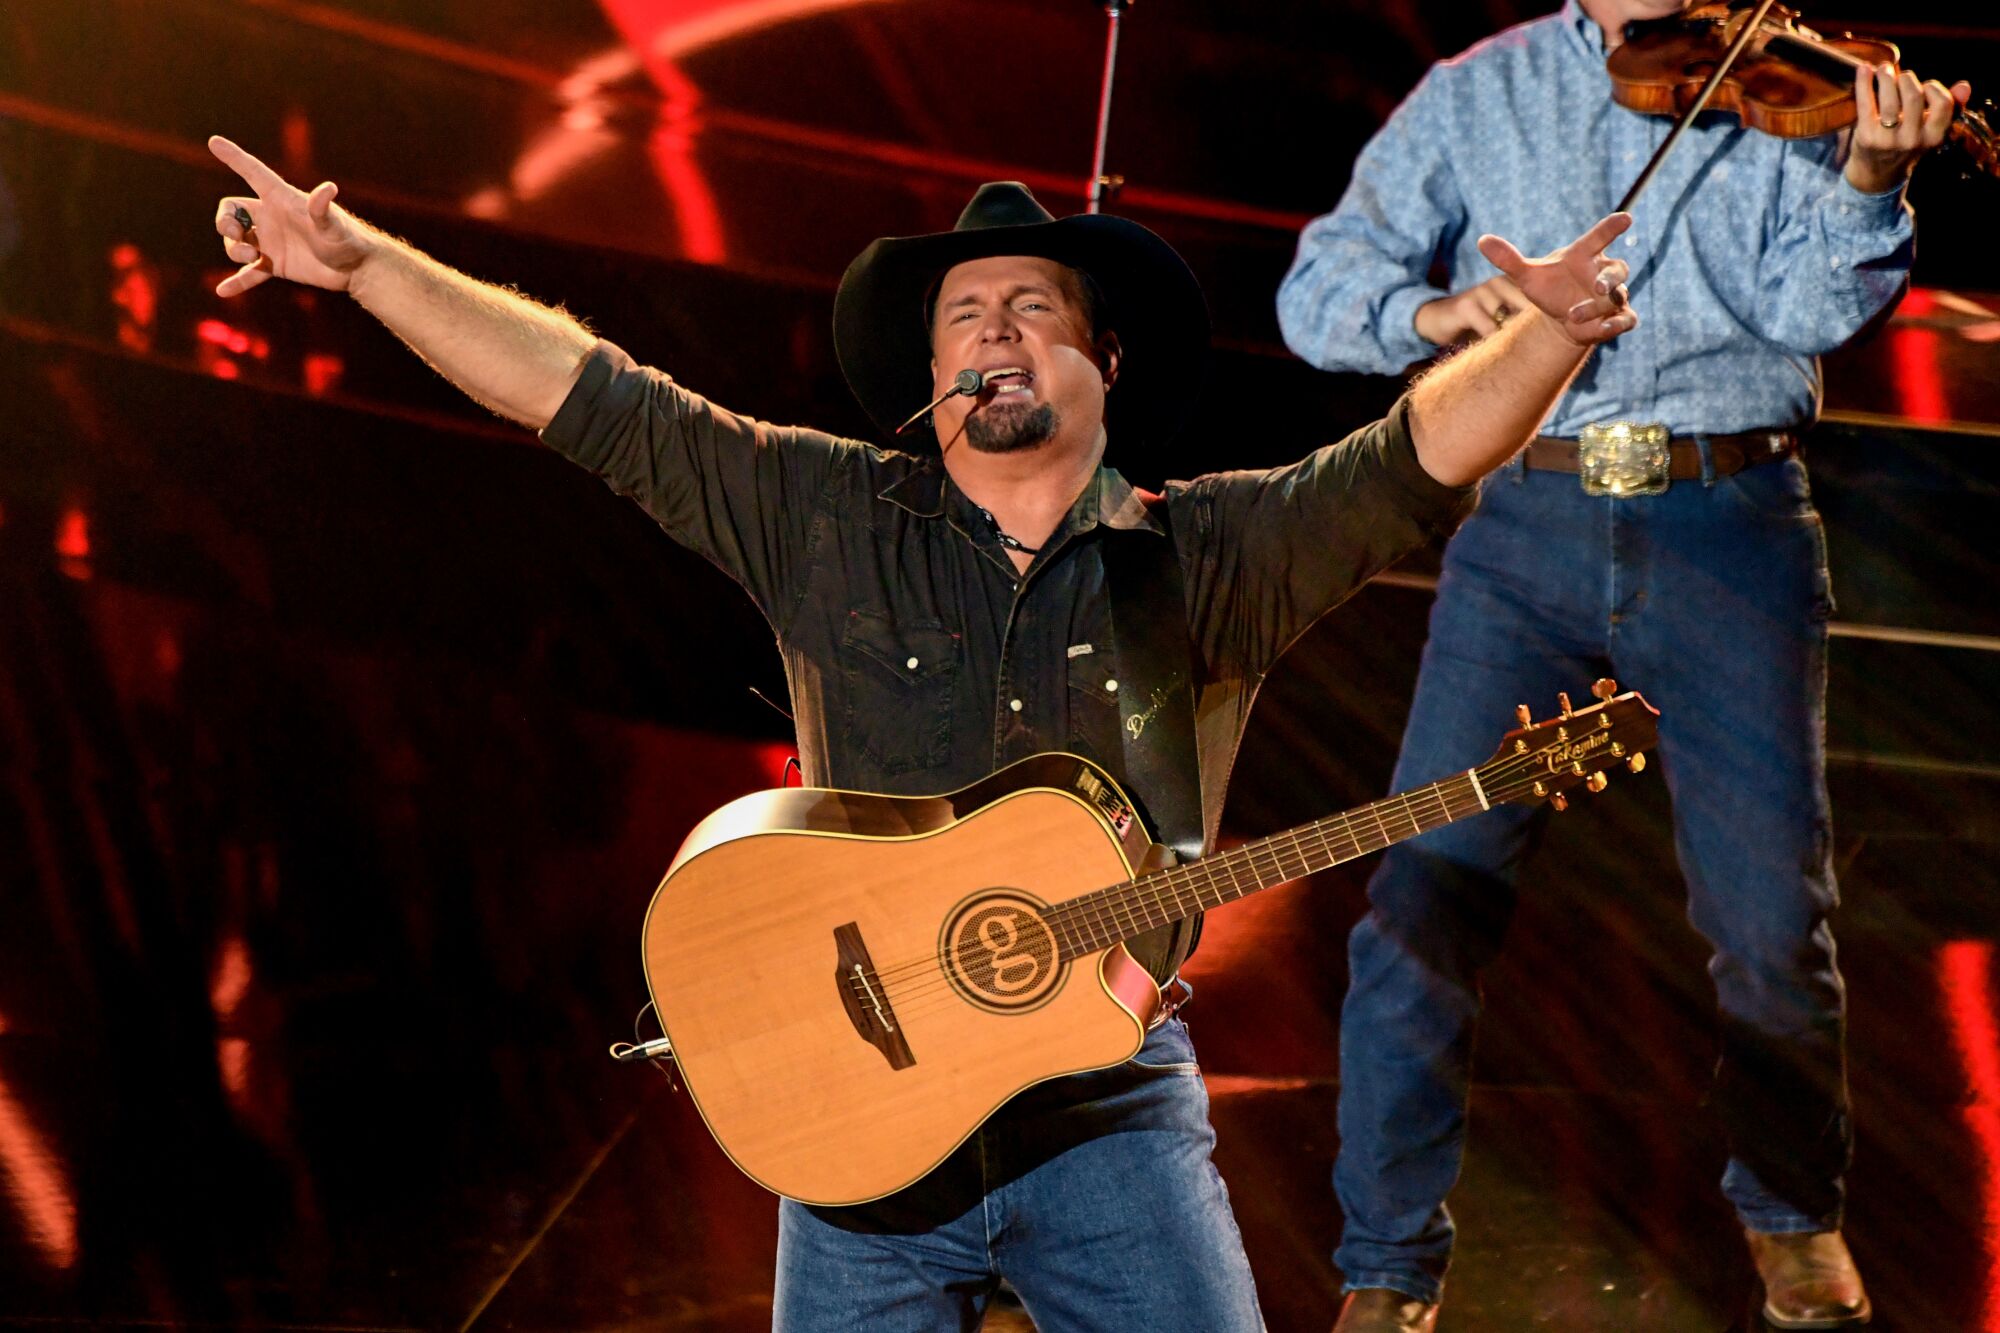 Garth Brooks, on stage with a fiddler, wears jeans and cowboy hat with his guitar slung over his shoulders. 